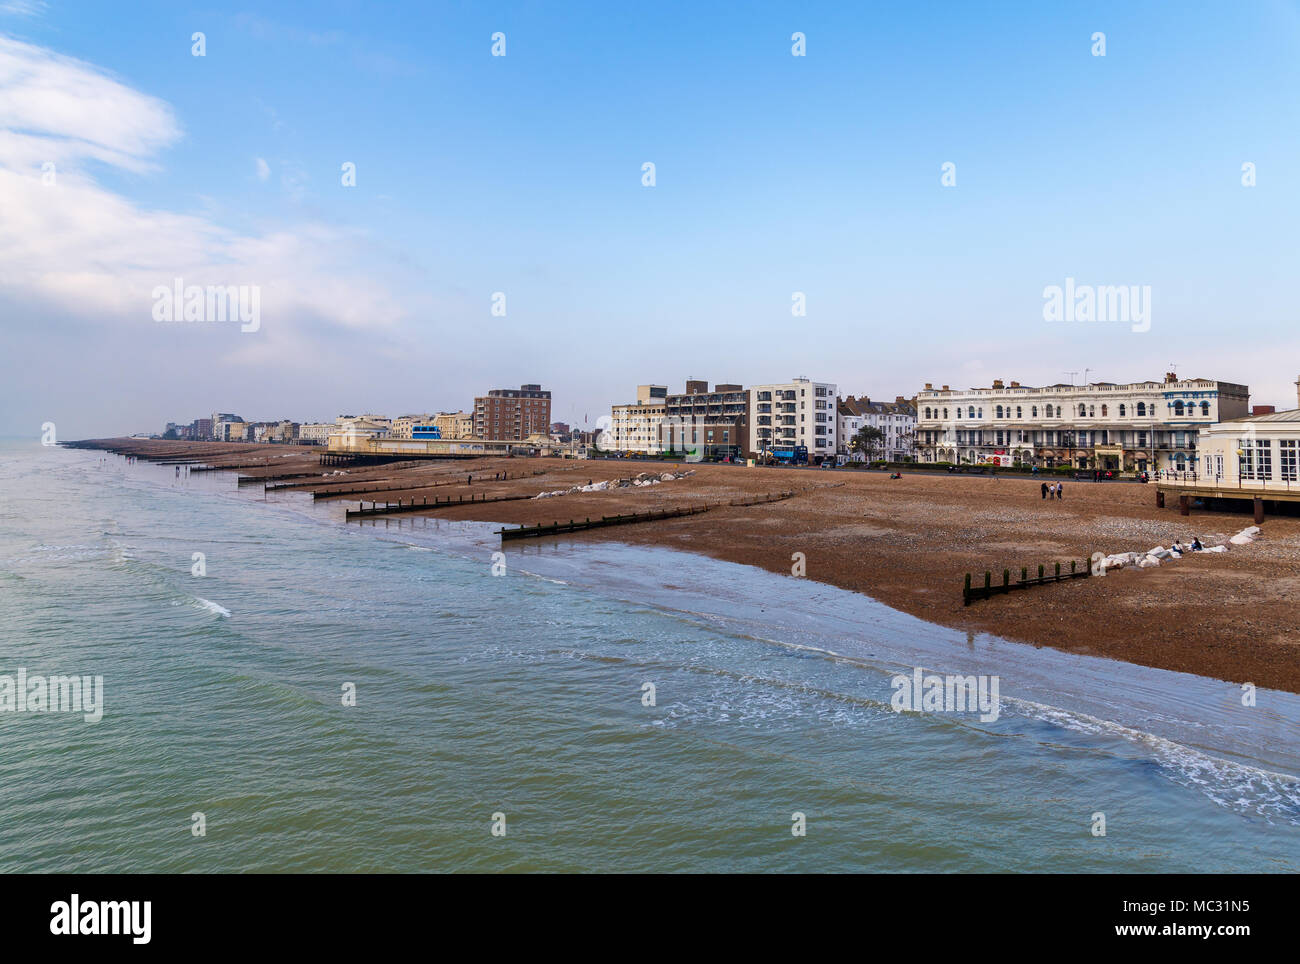 Worthing, West Sussex, England, UK - October 25, 2016: Worthing beach, seen from the pier, with clouds coming from the sea Stock Photo